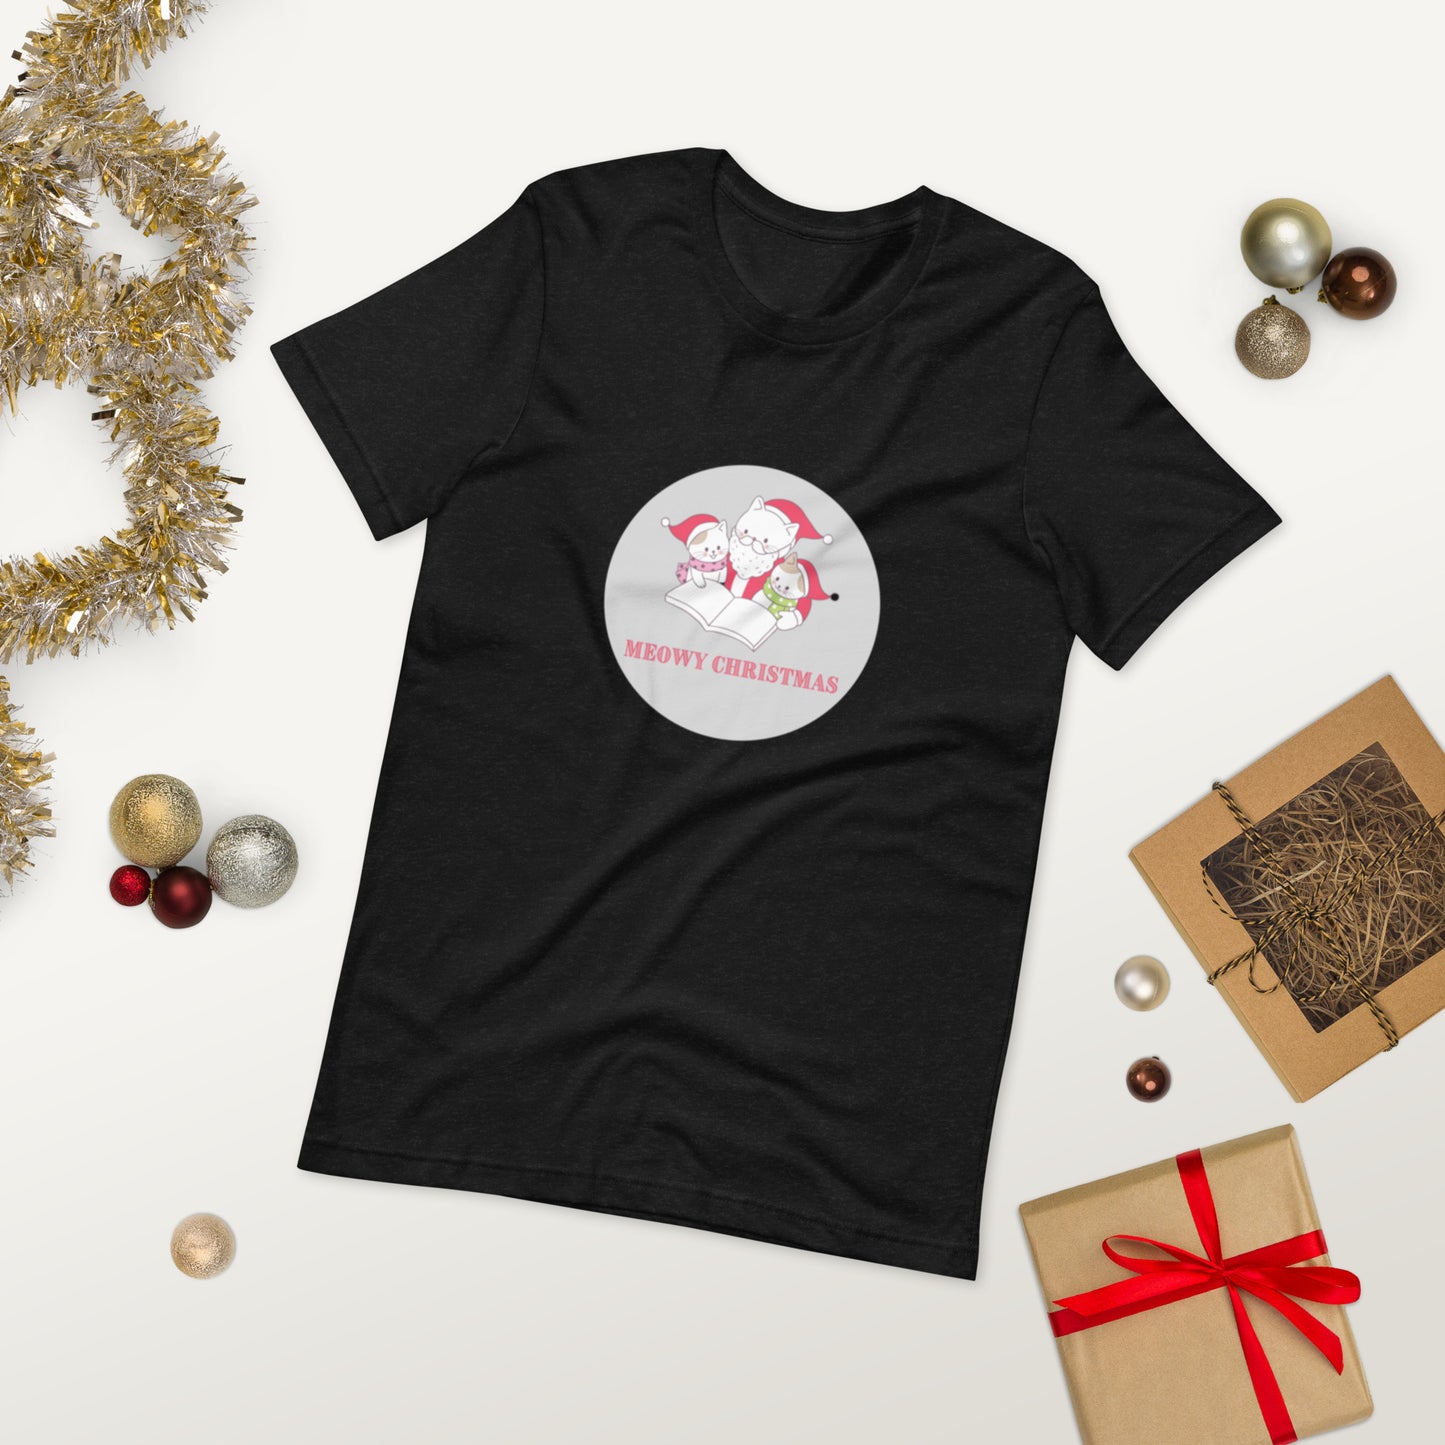 Meowy Christmas Unisex T-Shirt - The Spinster Librarian Shop